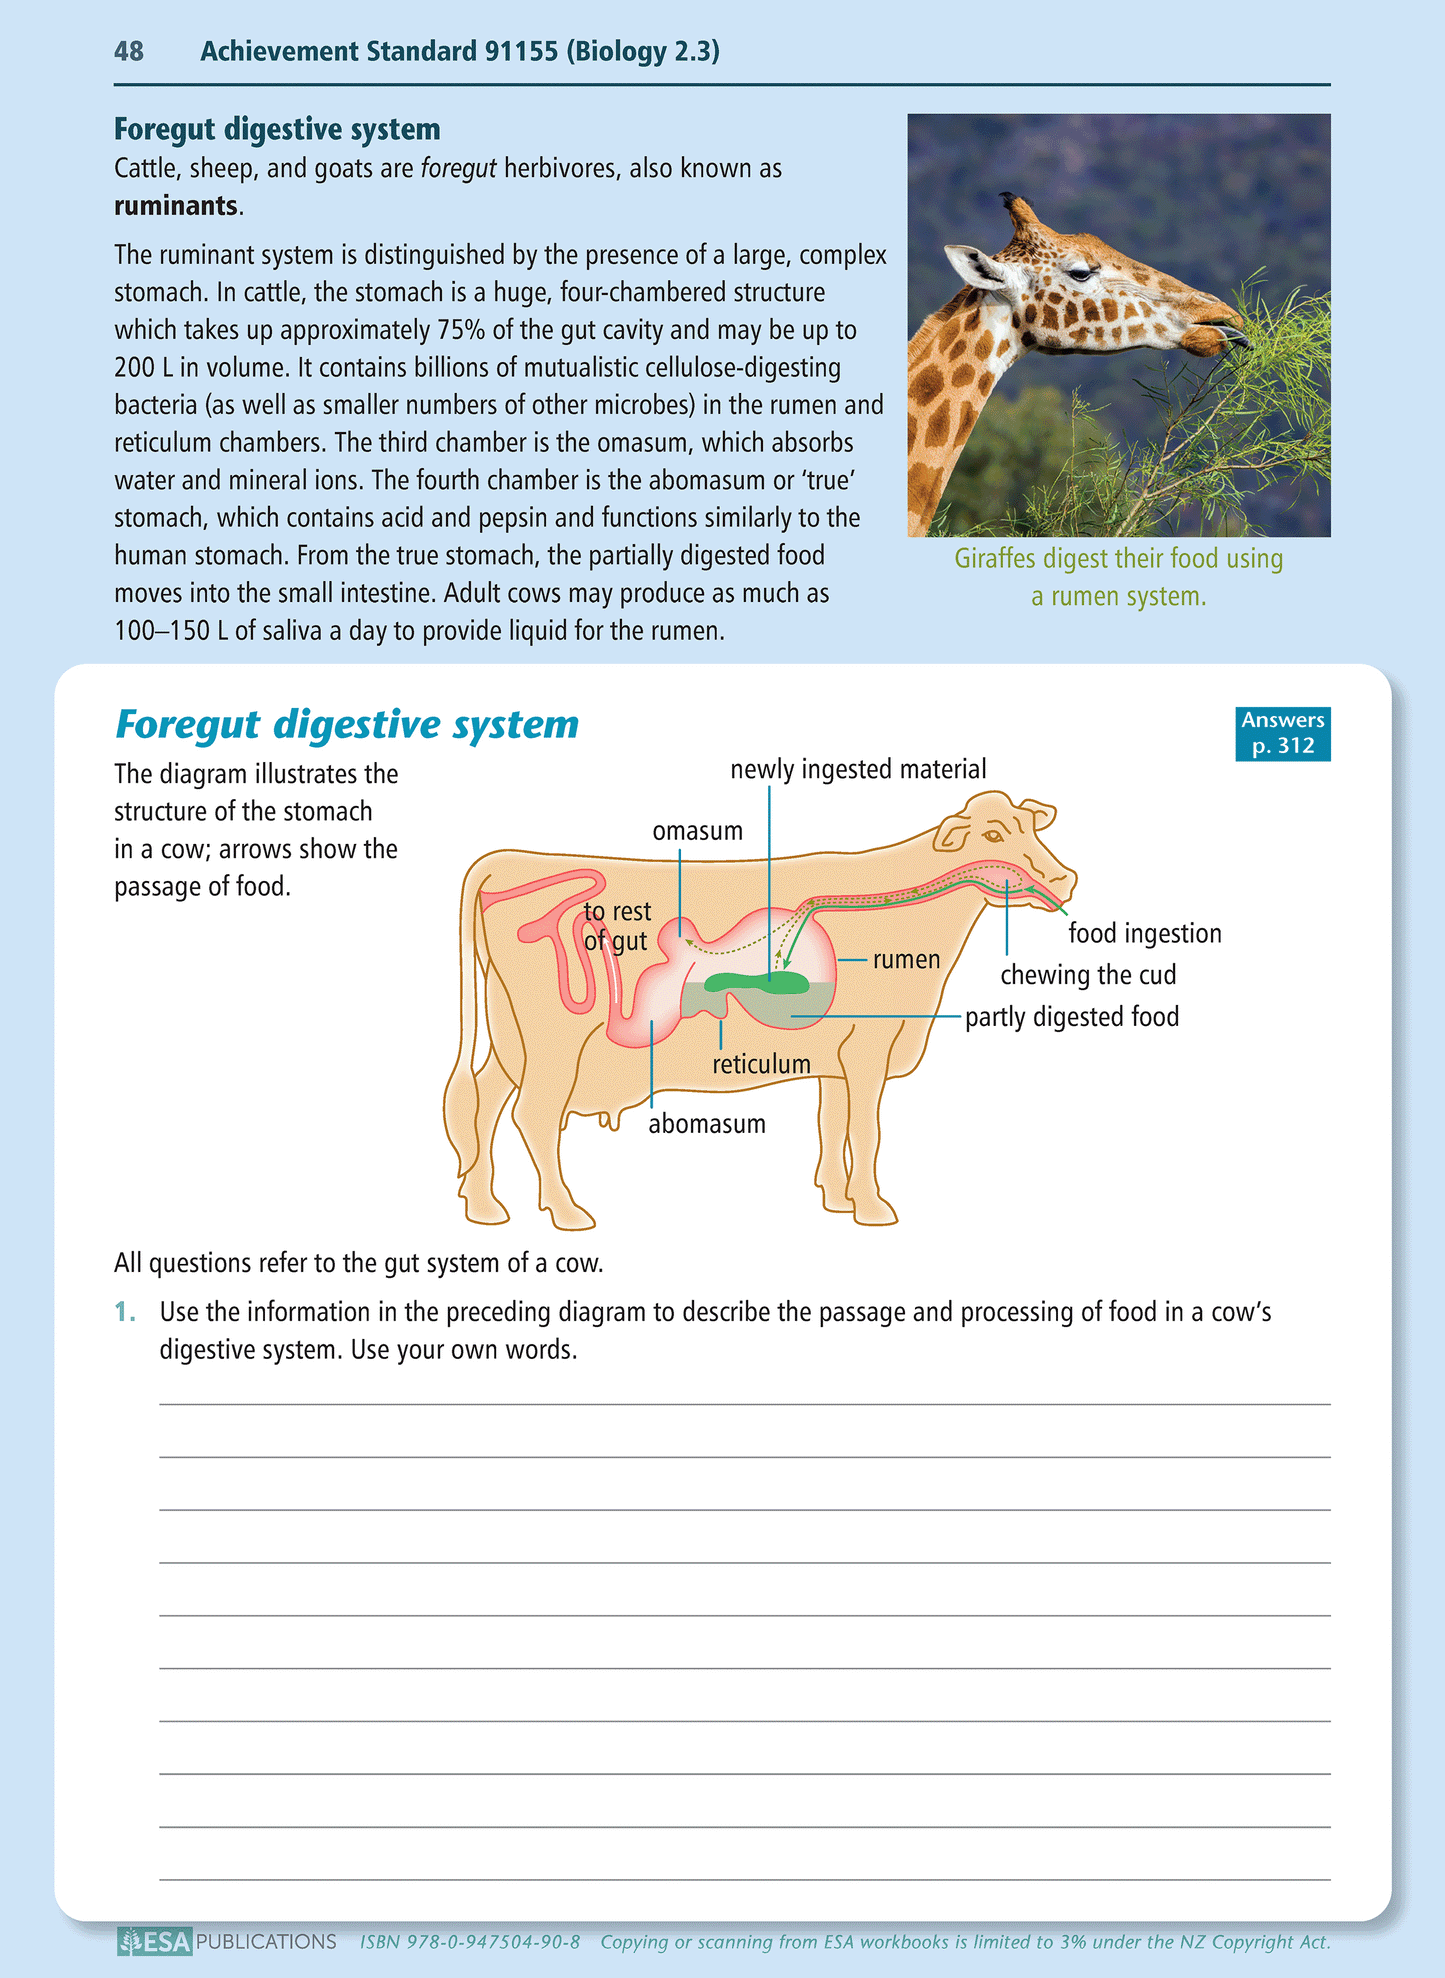 Level 2 Biology Learning Workbook - SPECIAL (damaged stock at $10 each)